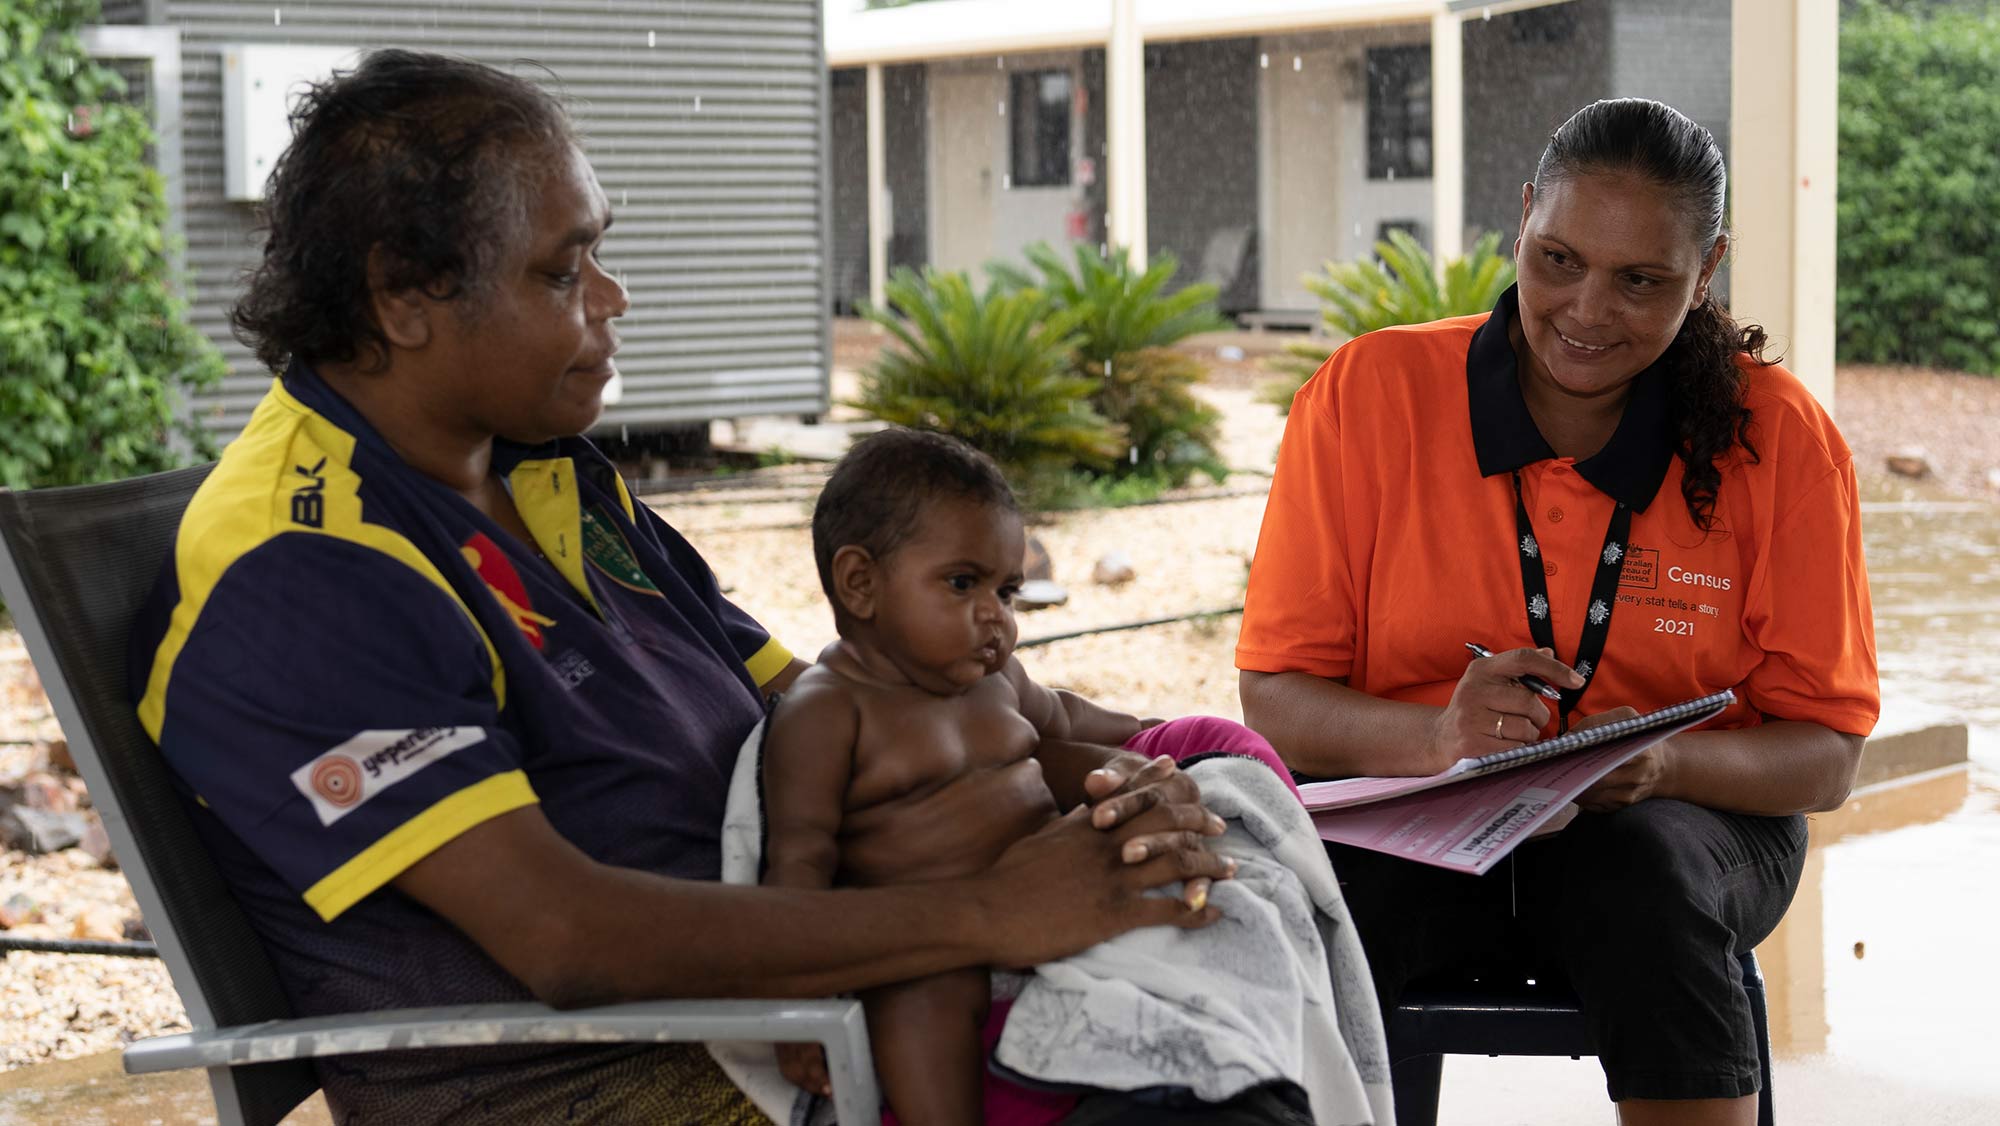 A woman is sitting in a chair with a child in her lap. A female Census staff member is smiling at the child with a pen and log book in her lap.